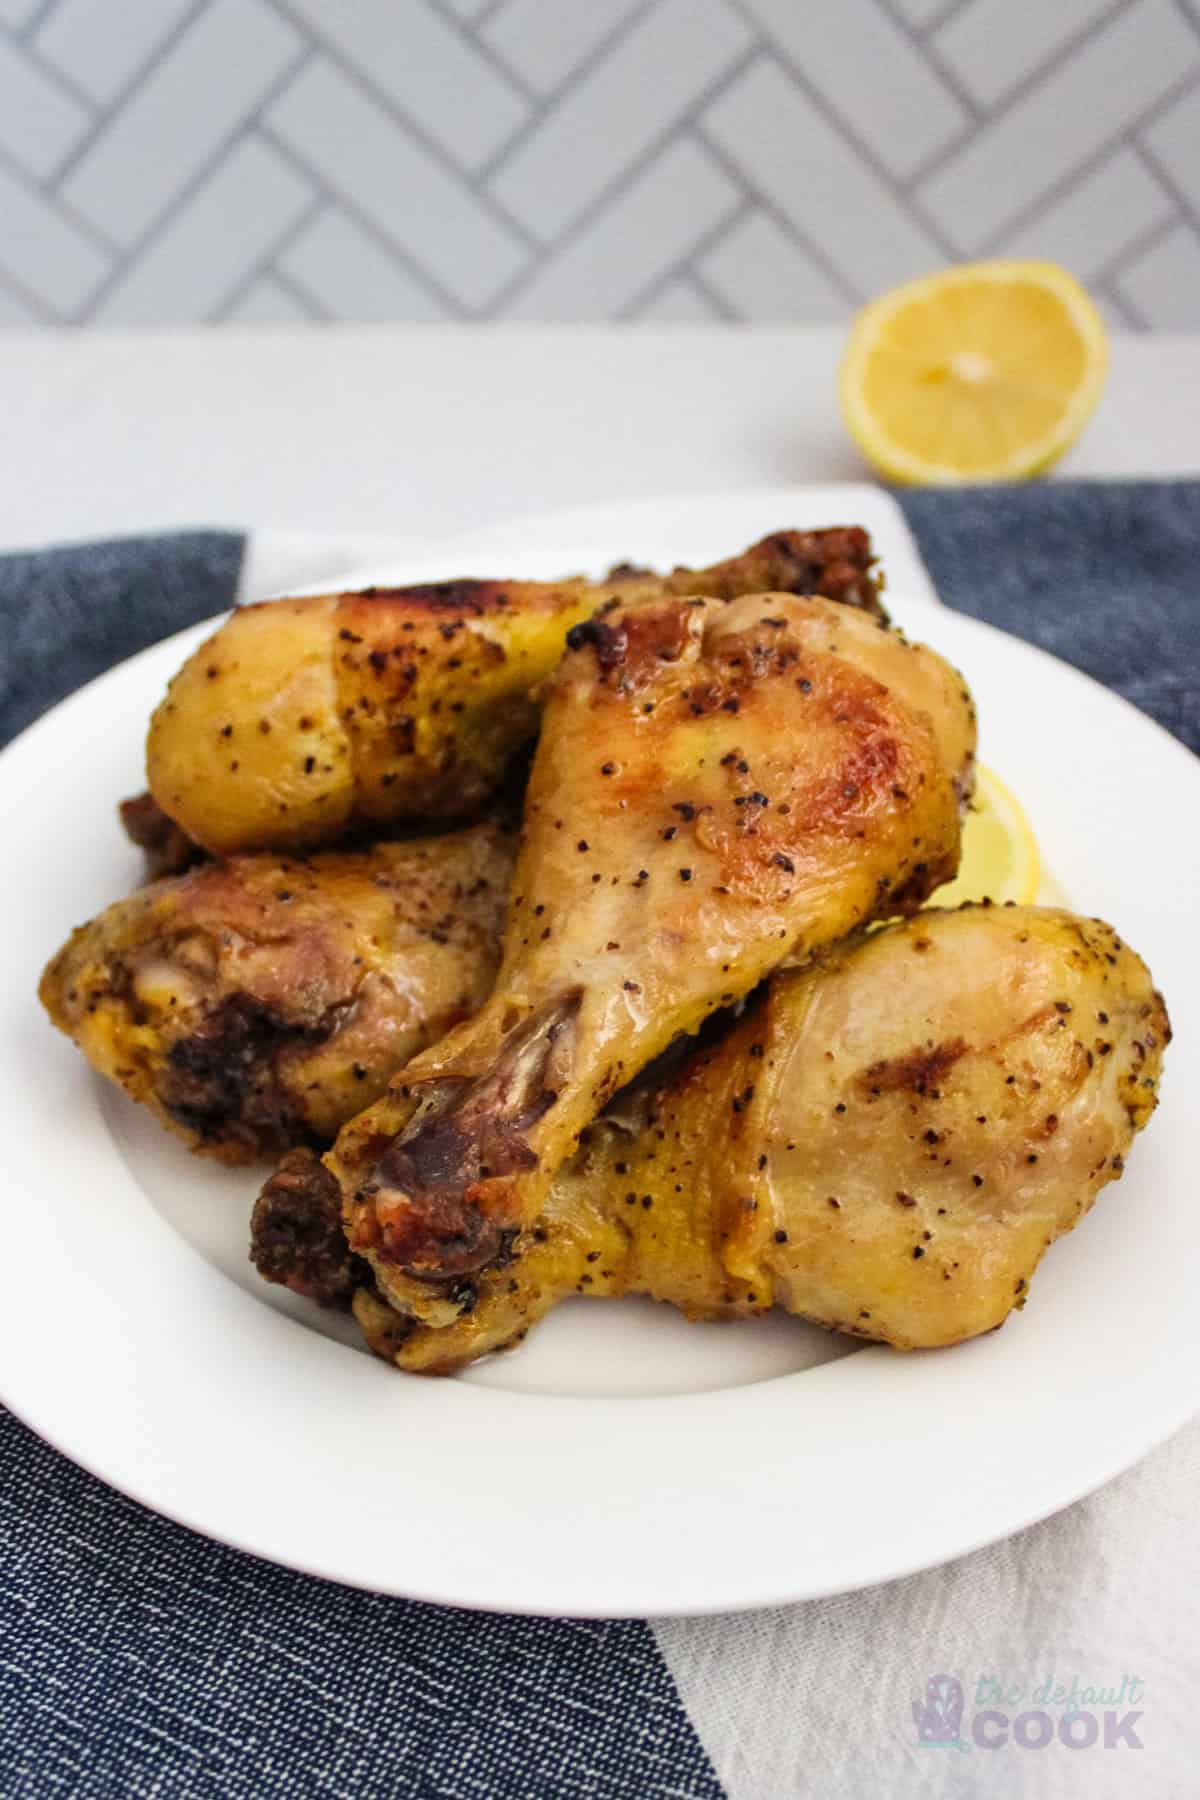 A plate of chicken legs with lemon slices in the back on a white and blue kitchen towel.